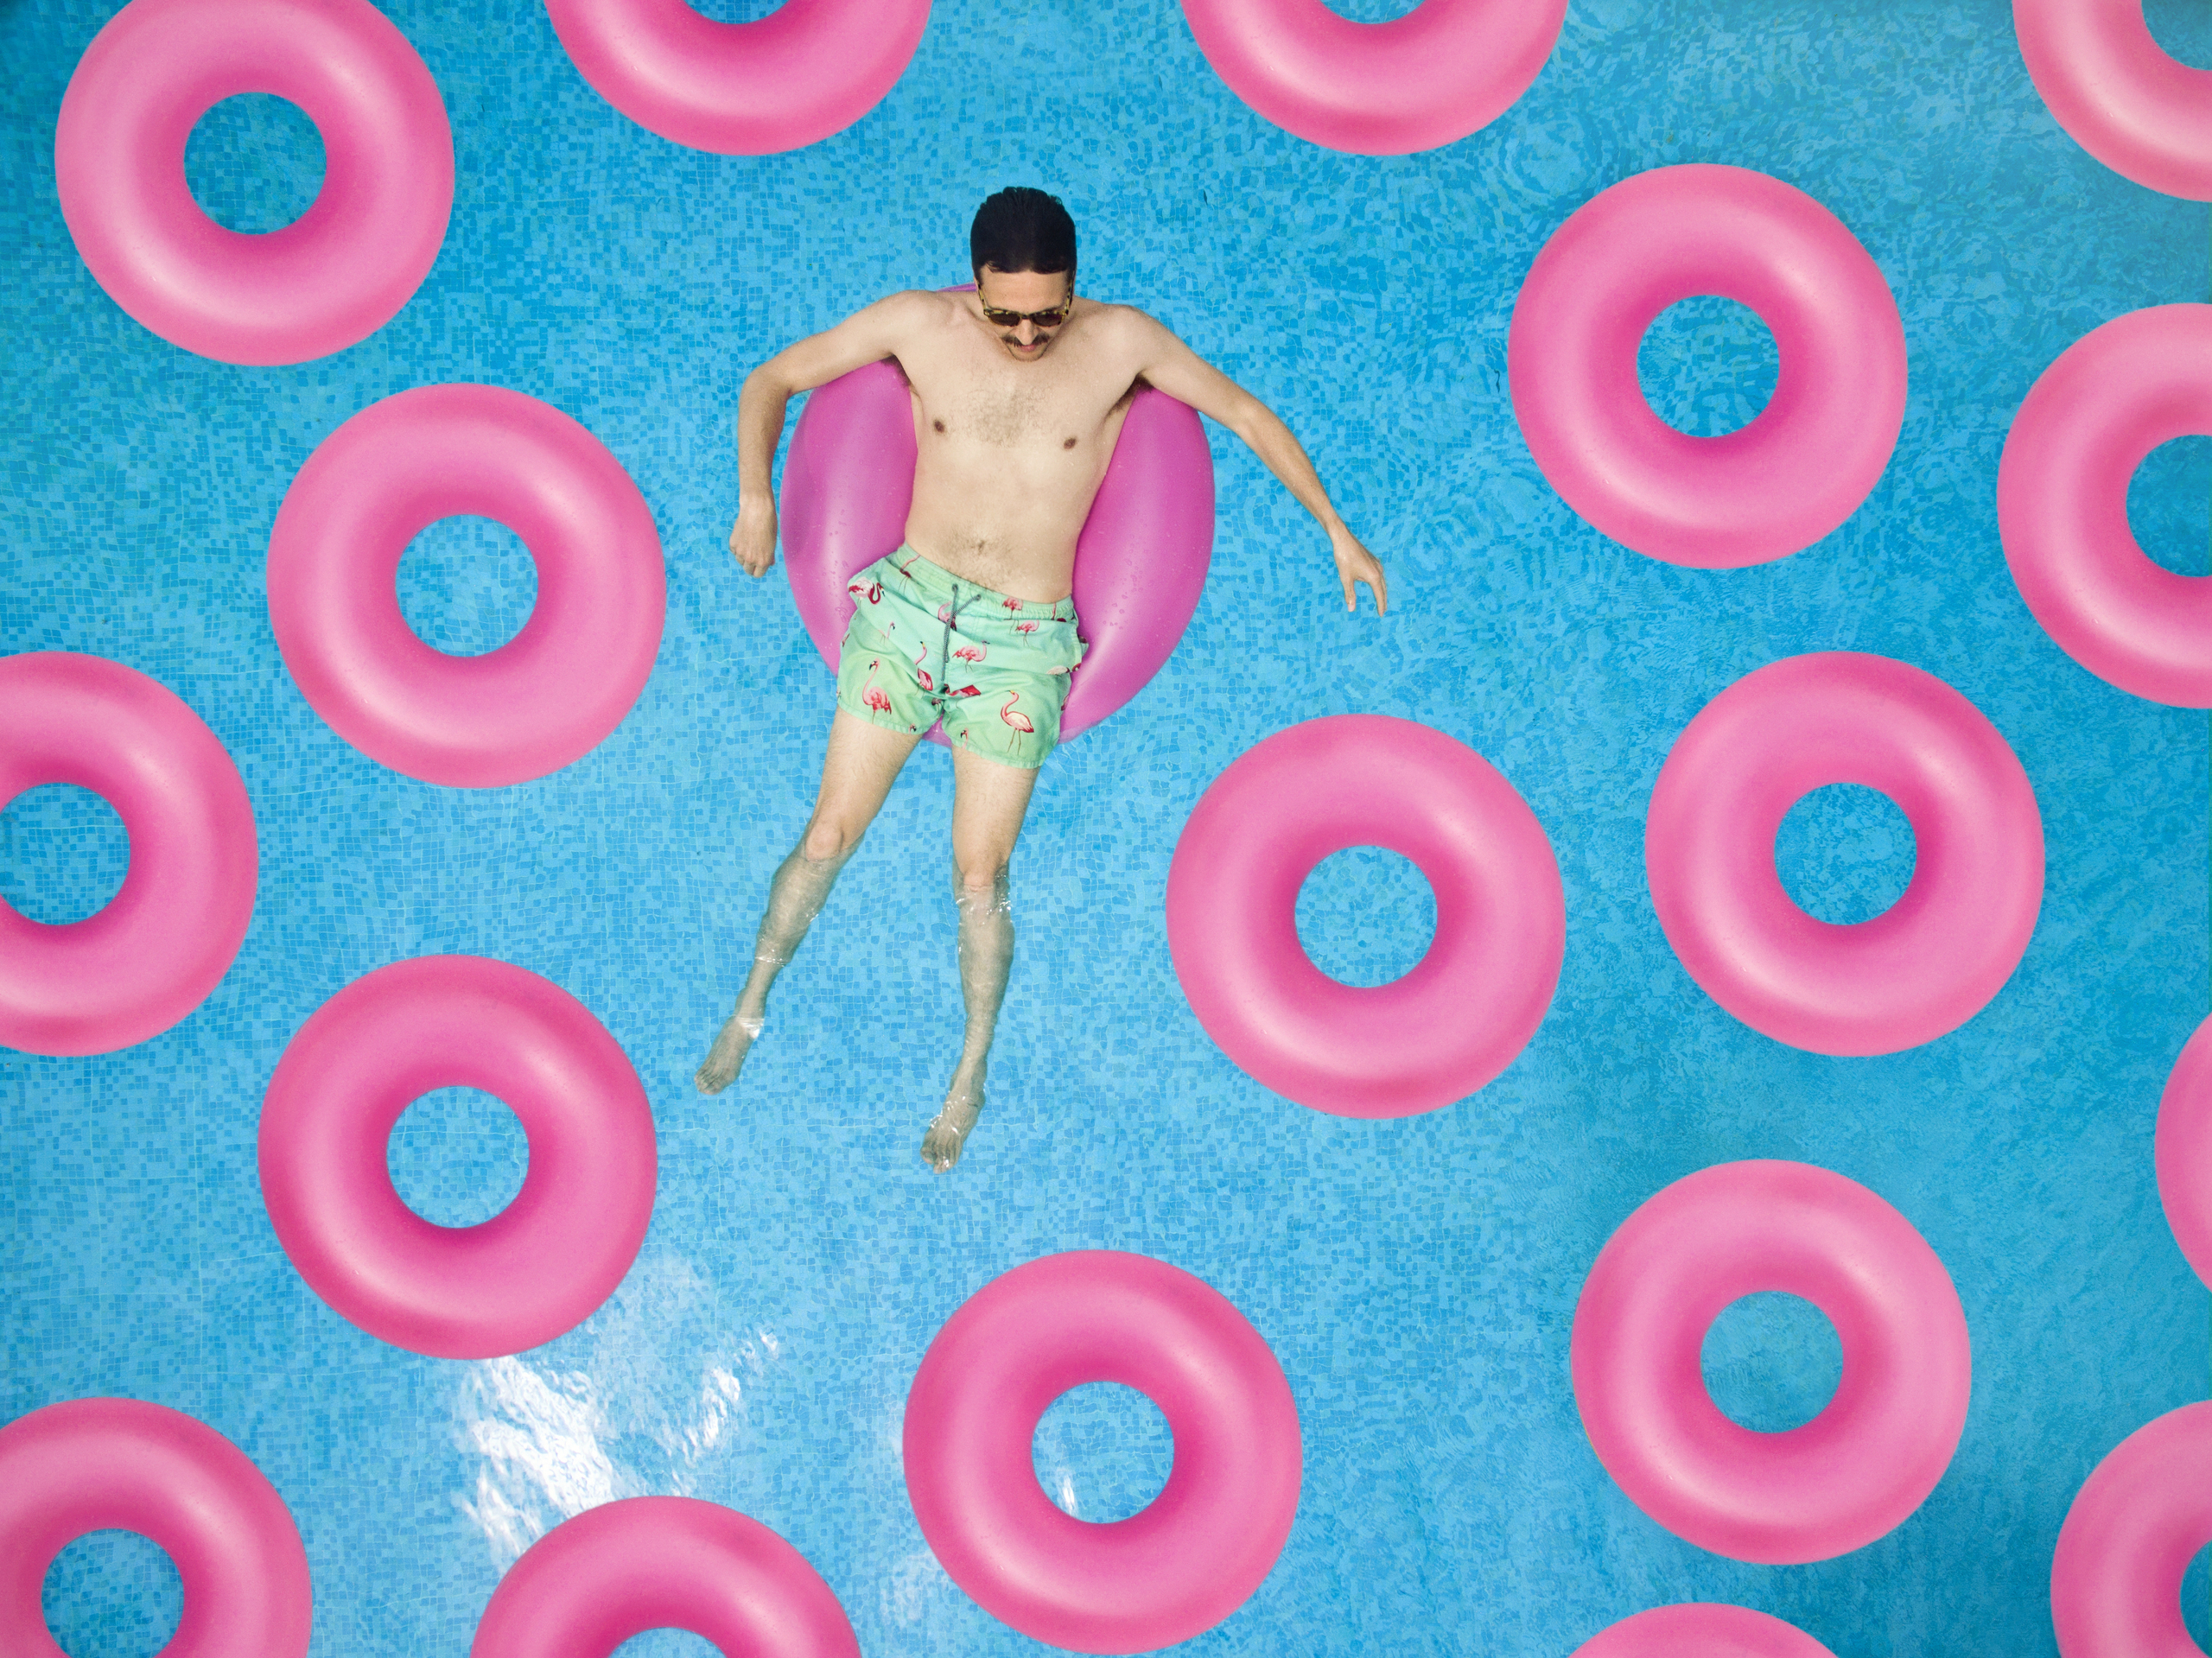 Guy On Pink Pool Floats